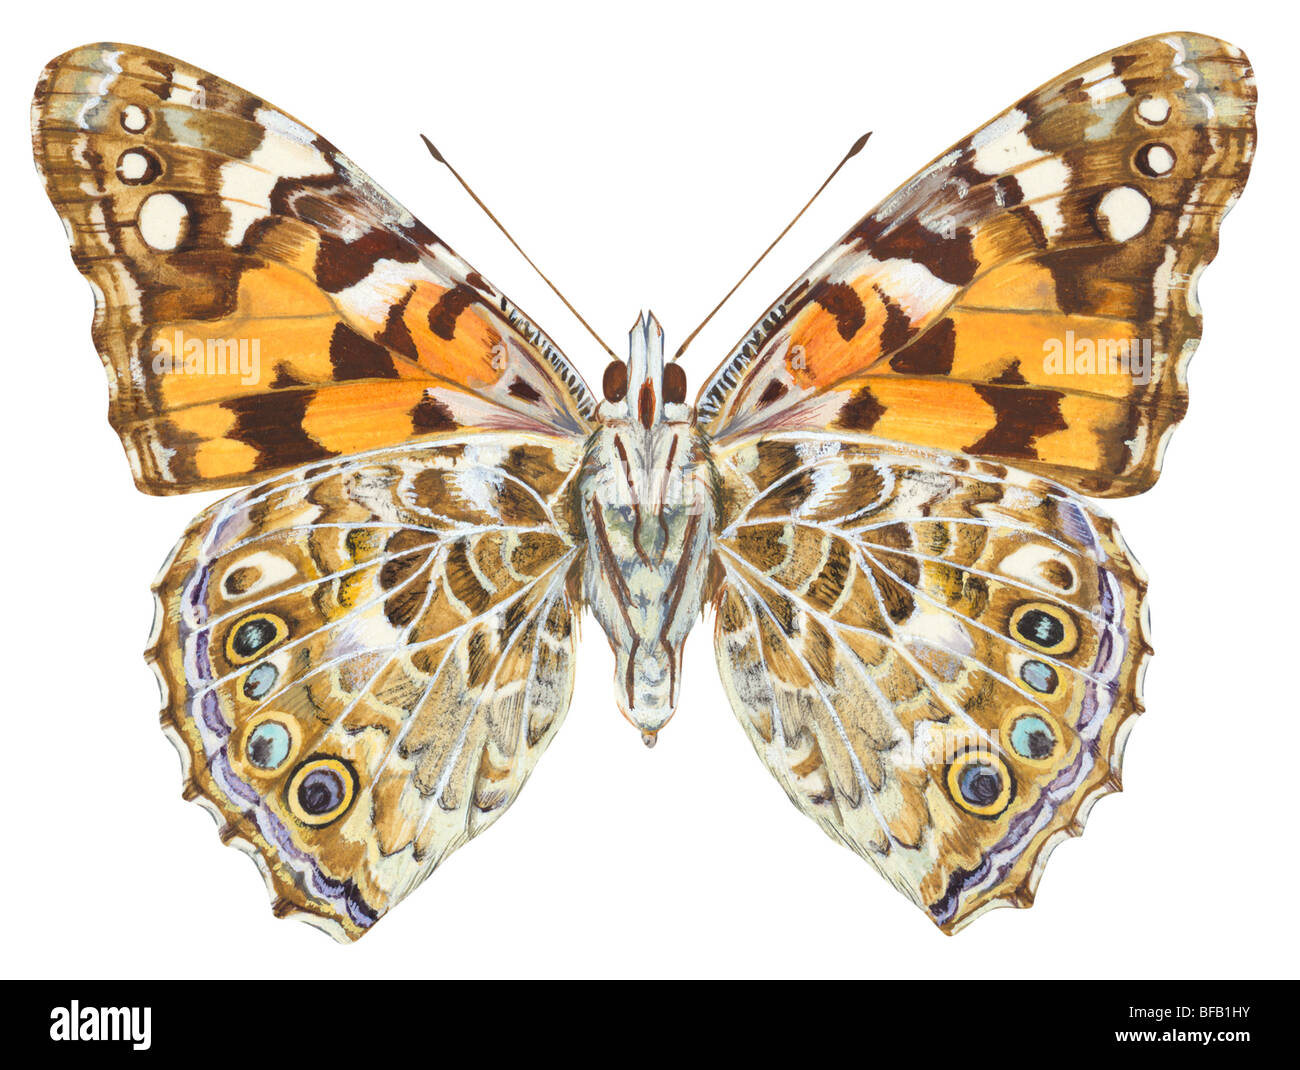 Dipinto di lady butterfly (Vanessa virginiensis). Foto Stock